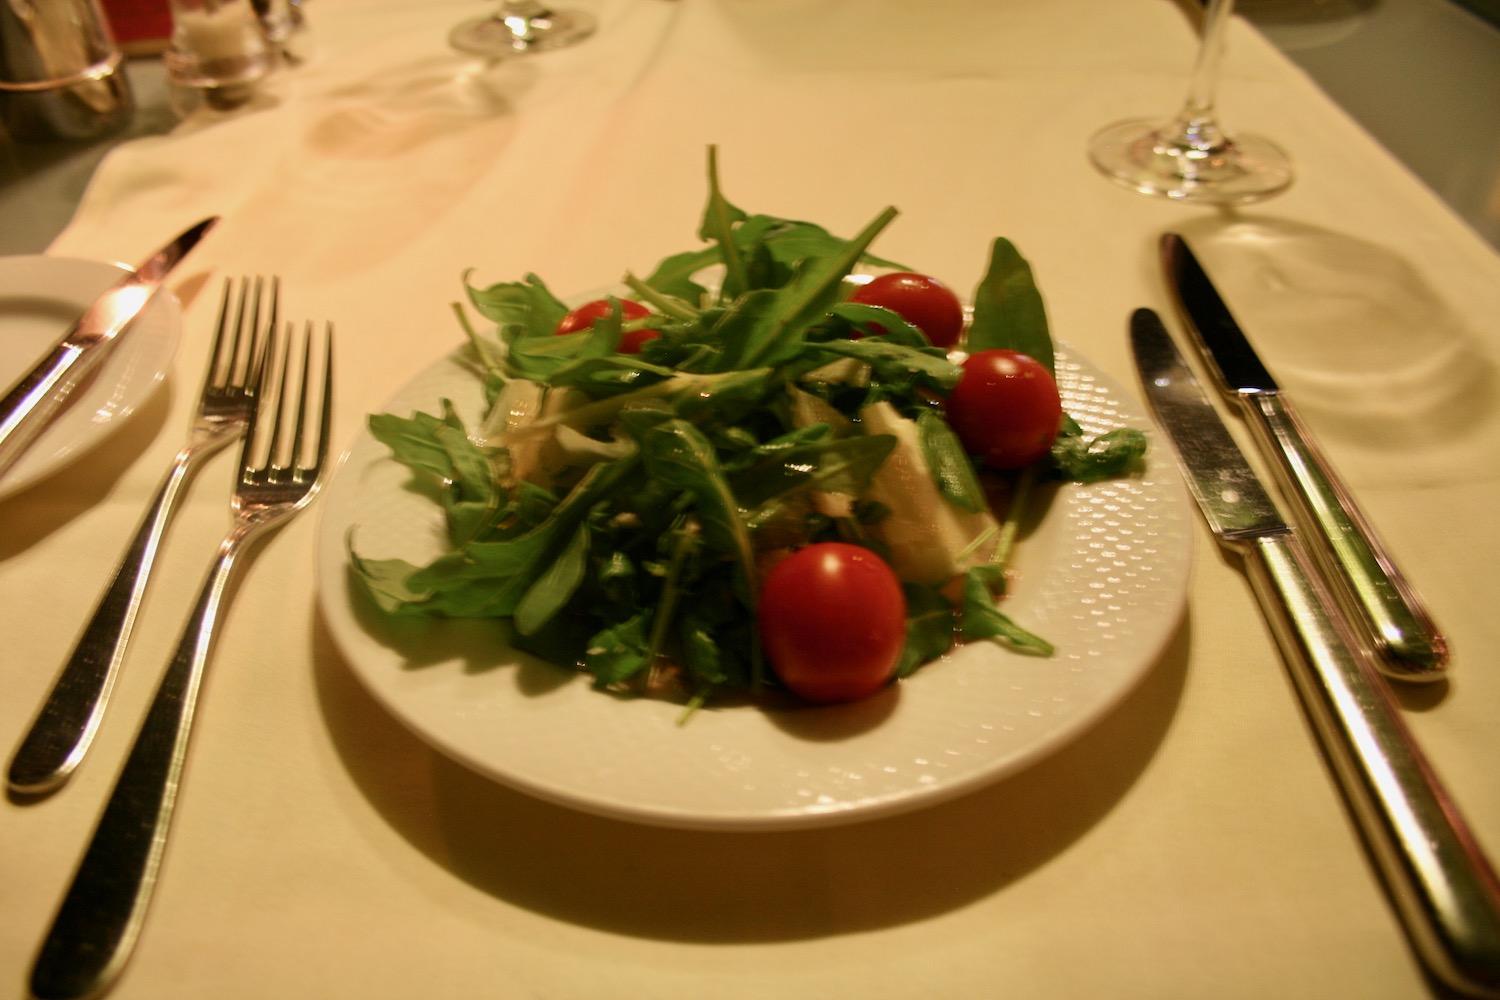 a plate of salad with tomatoes and greens